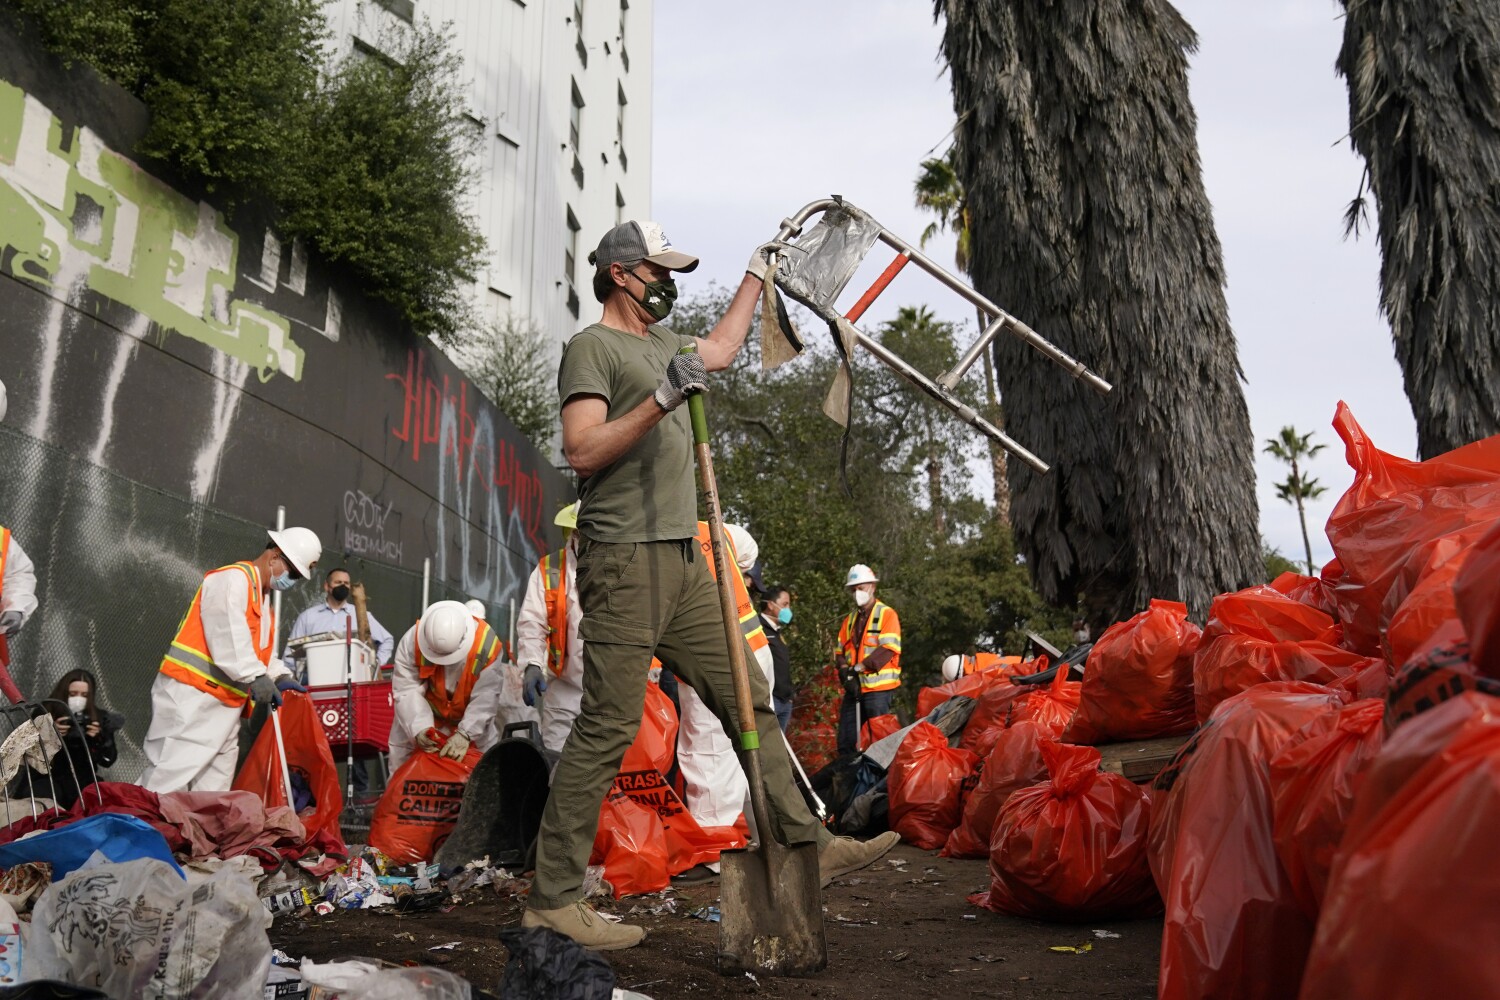 Opposition mounts against Newsom's plan for court-ordered treatment of homeless people